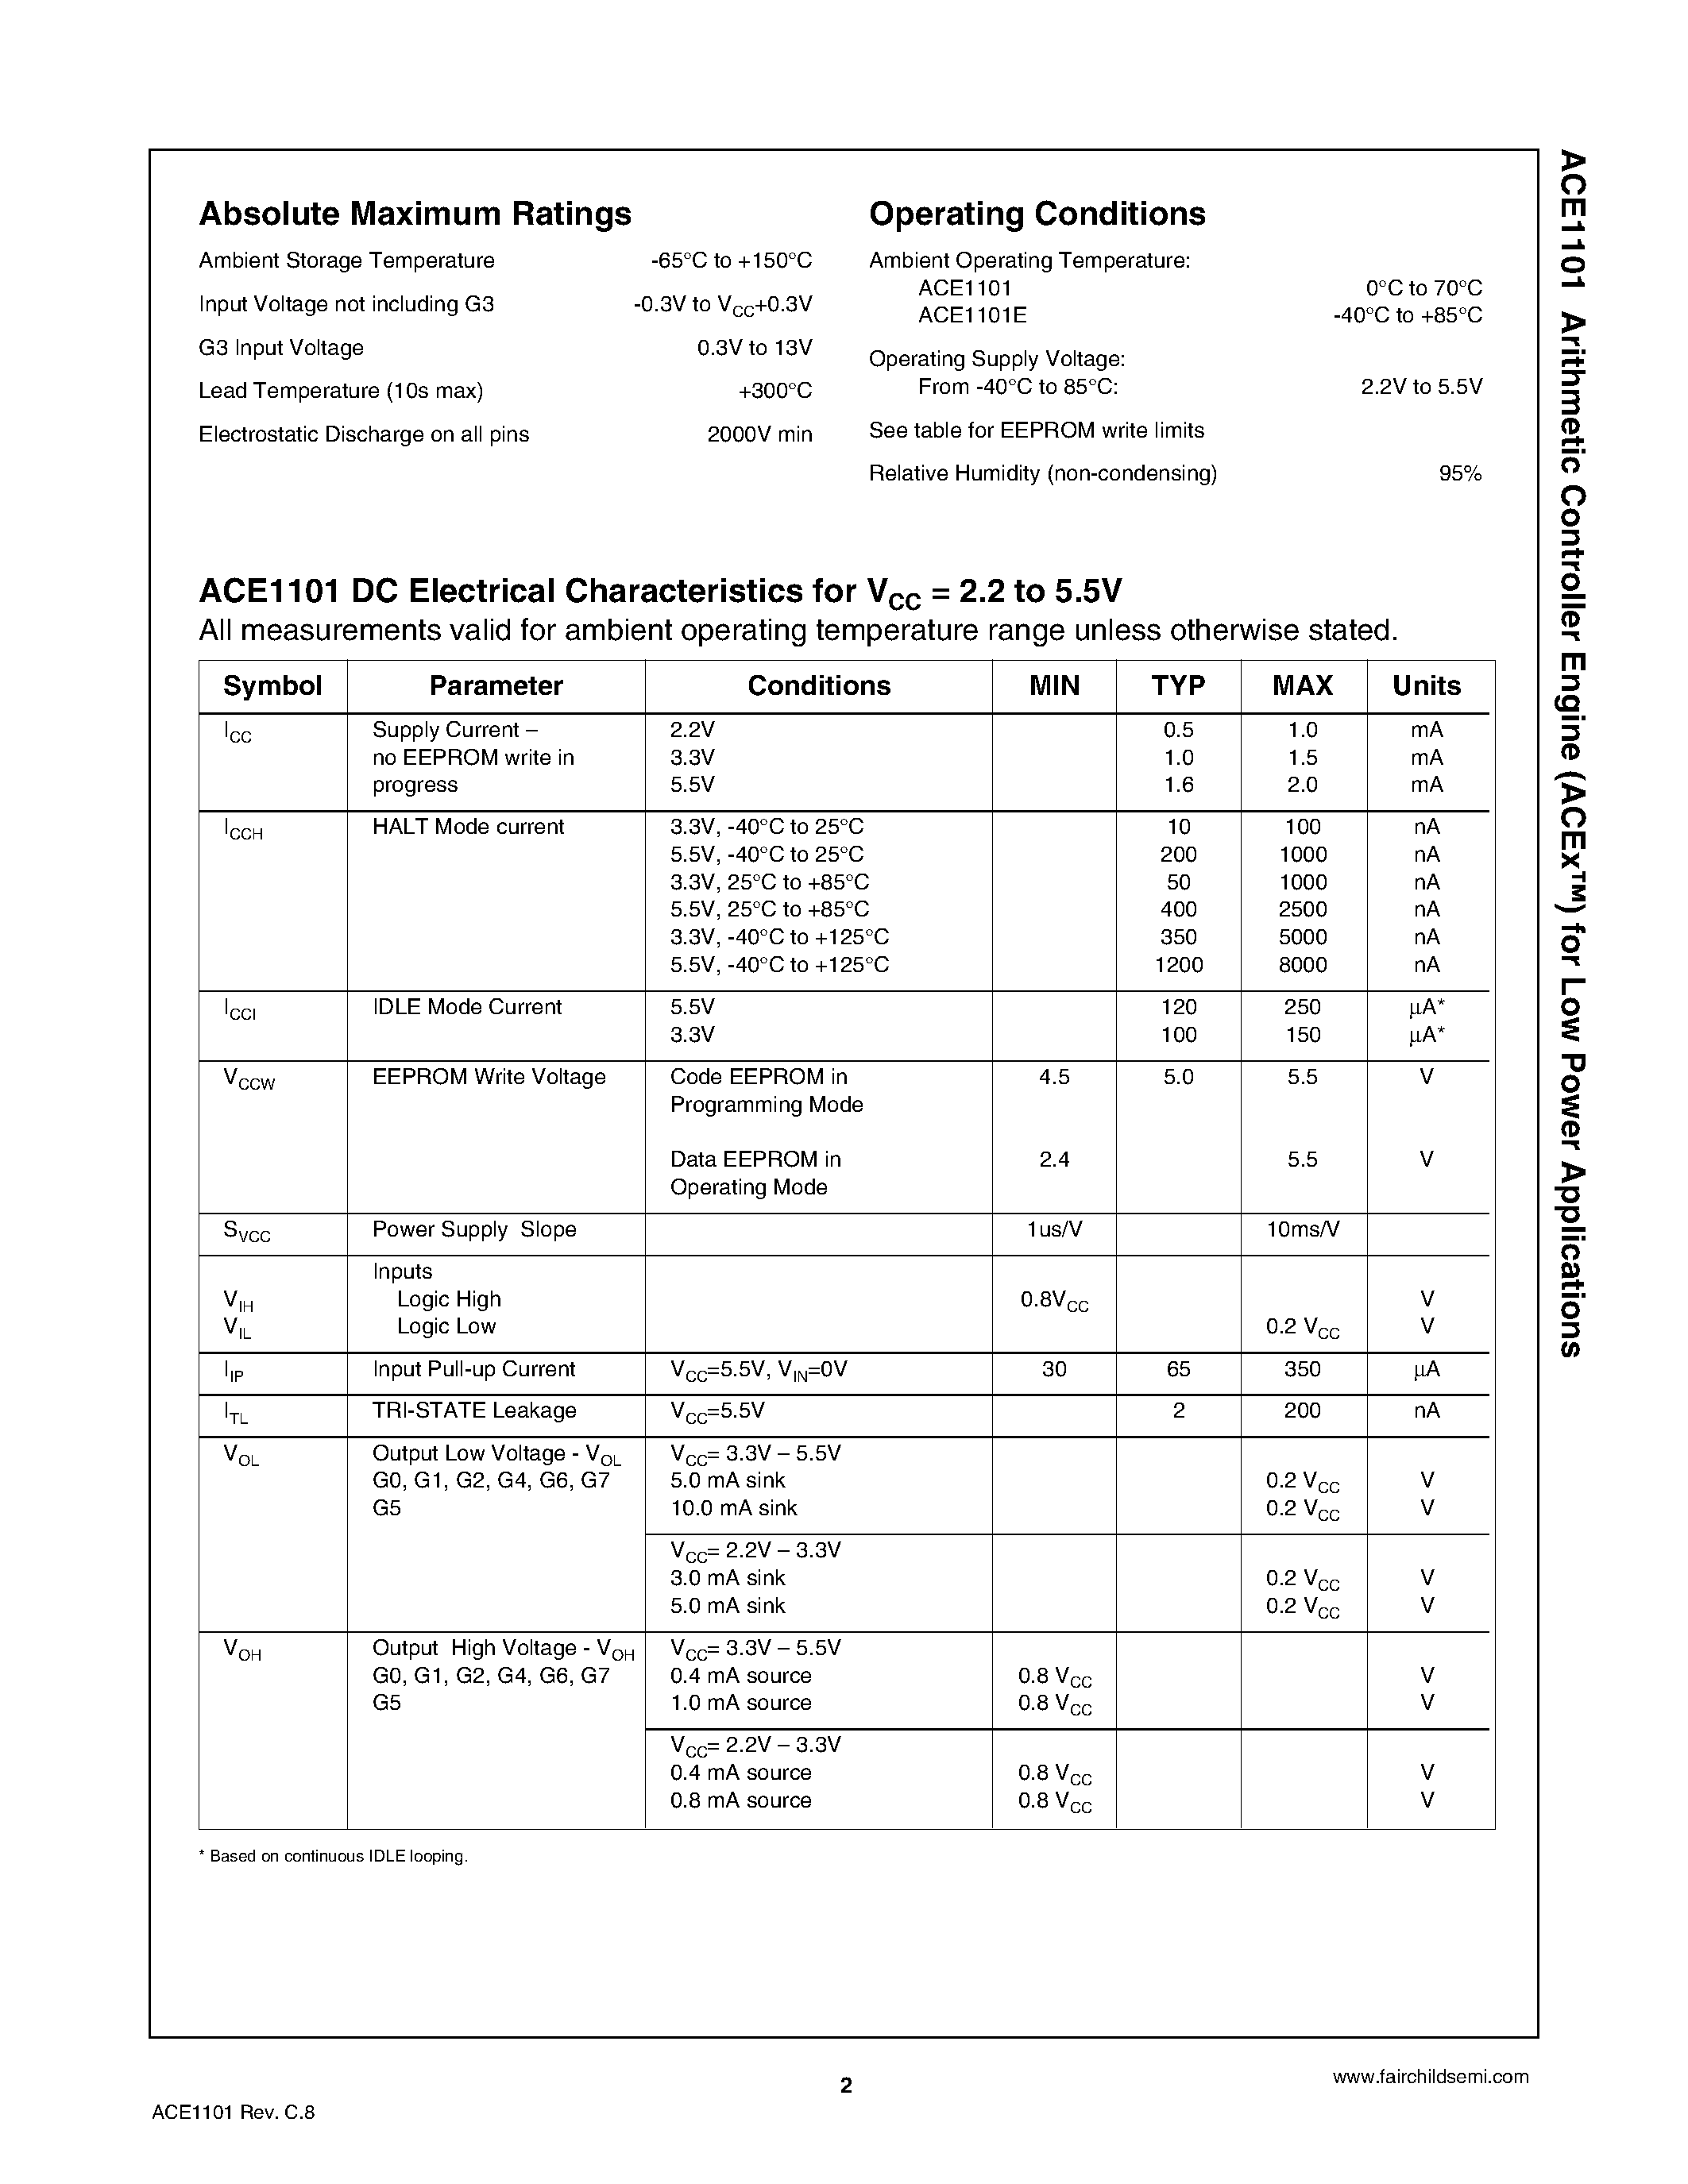 Datasheet ACE1101BV - Arithmetic Controller Engine (ACEx) for Low Power Applications page 2